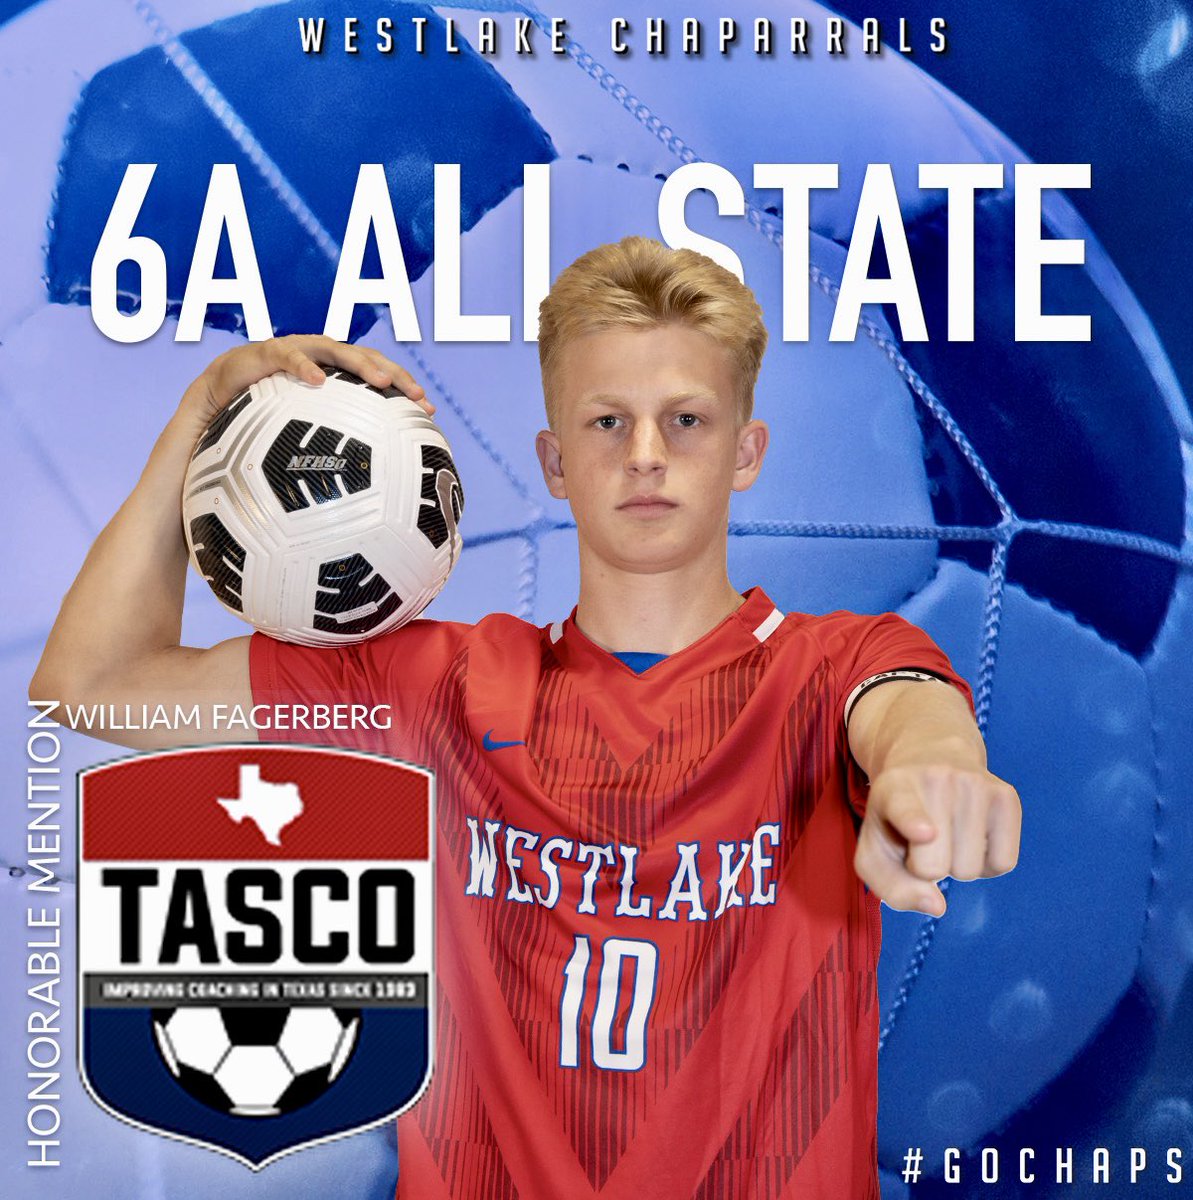 Congratulations to William Fagerberg on his selection to the TASCO All-State Team. William is the first Chap selected to the team since 2017 and will play in the TASCO All-Star match in May. #GoChaps